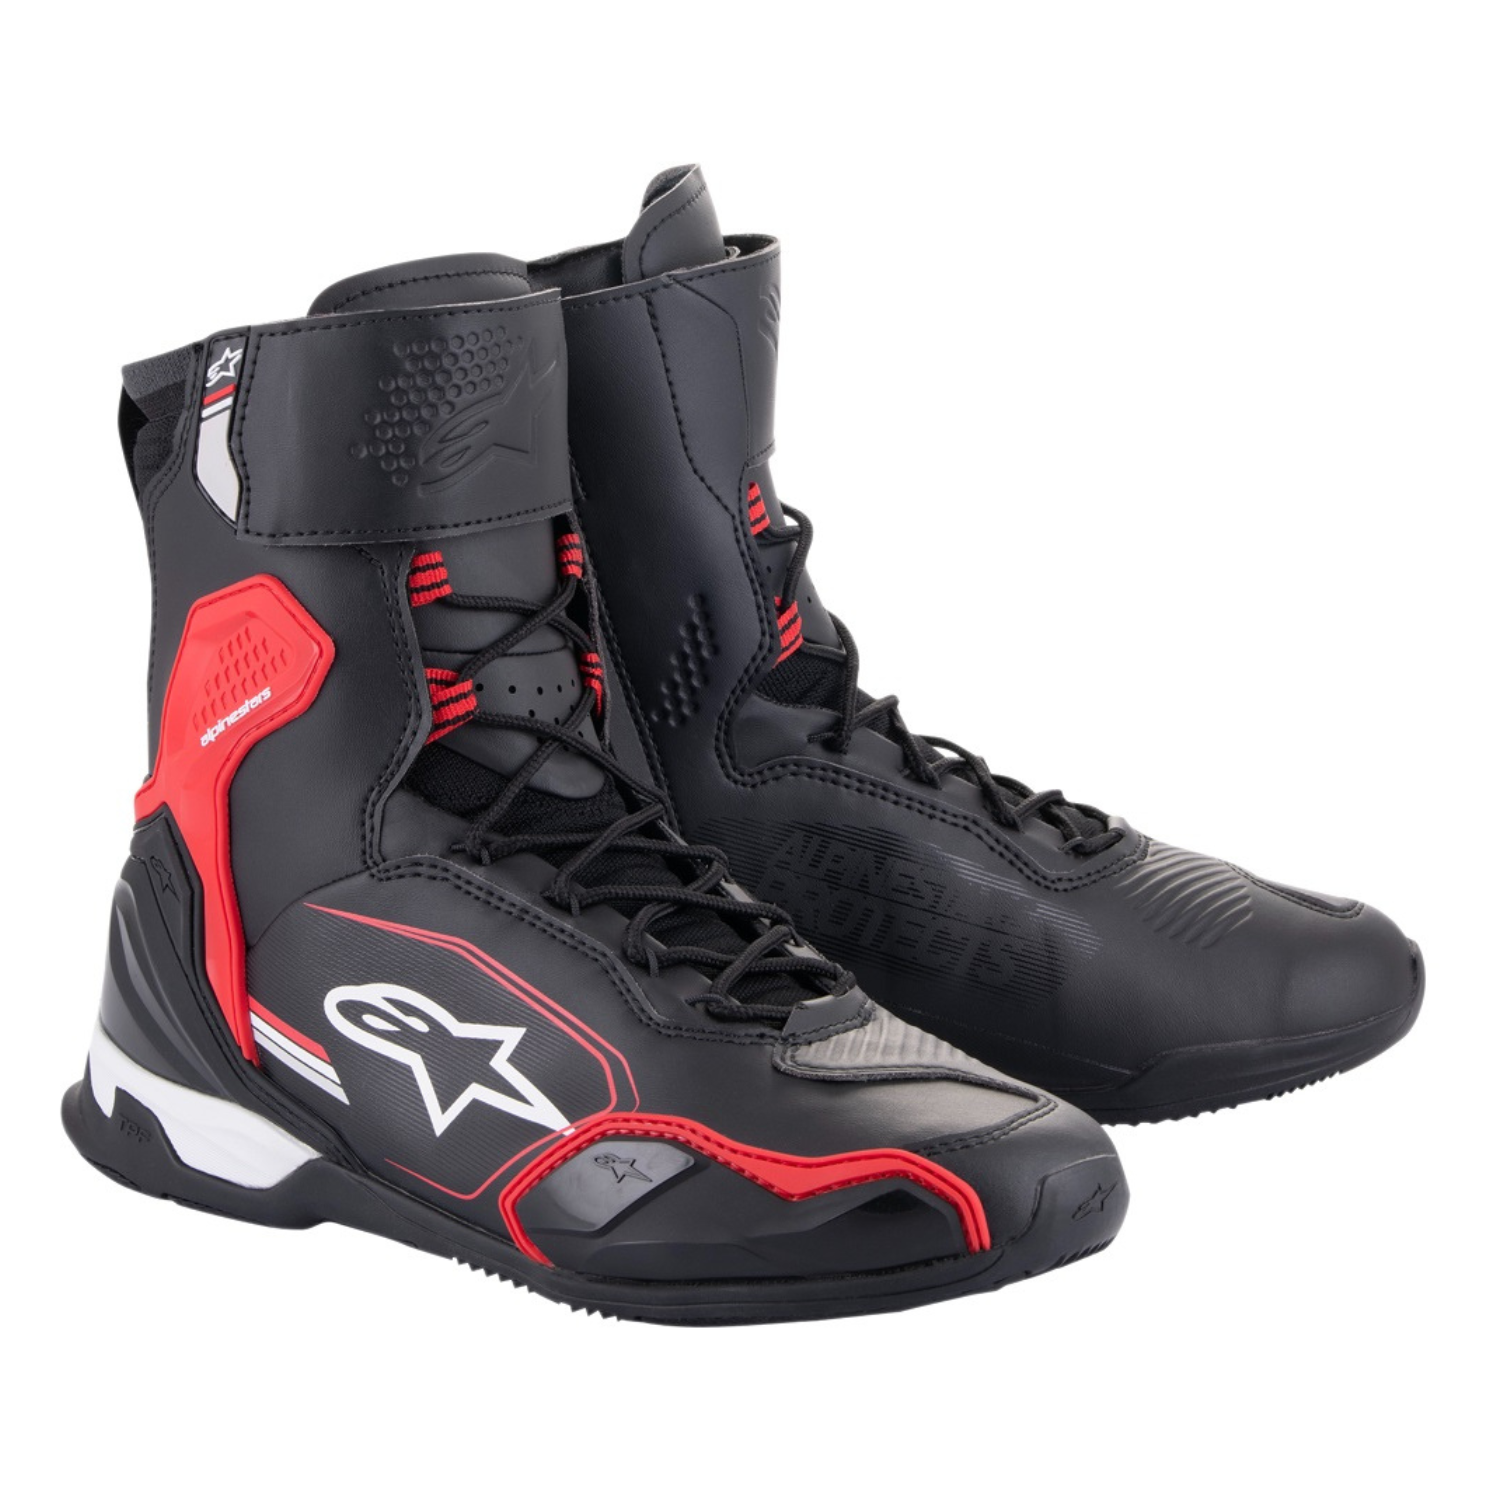 Image of Alpinestars Superfaster Shoes Black Bright Red White Size US 6 EN